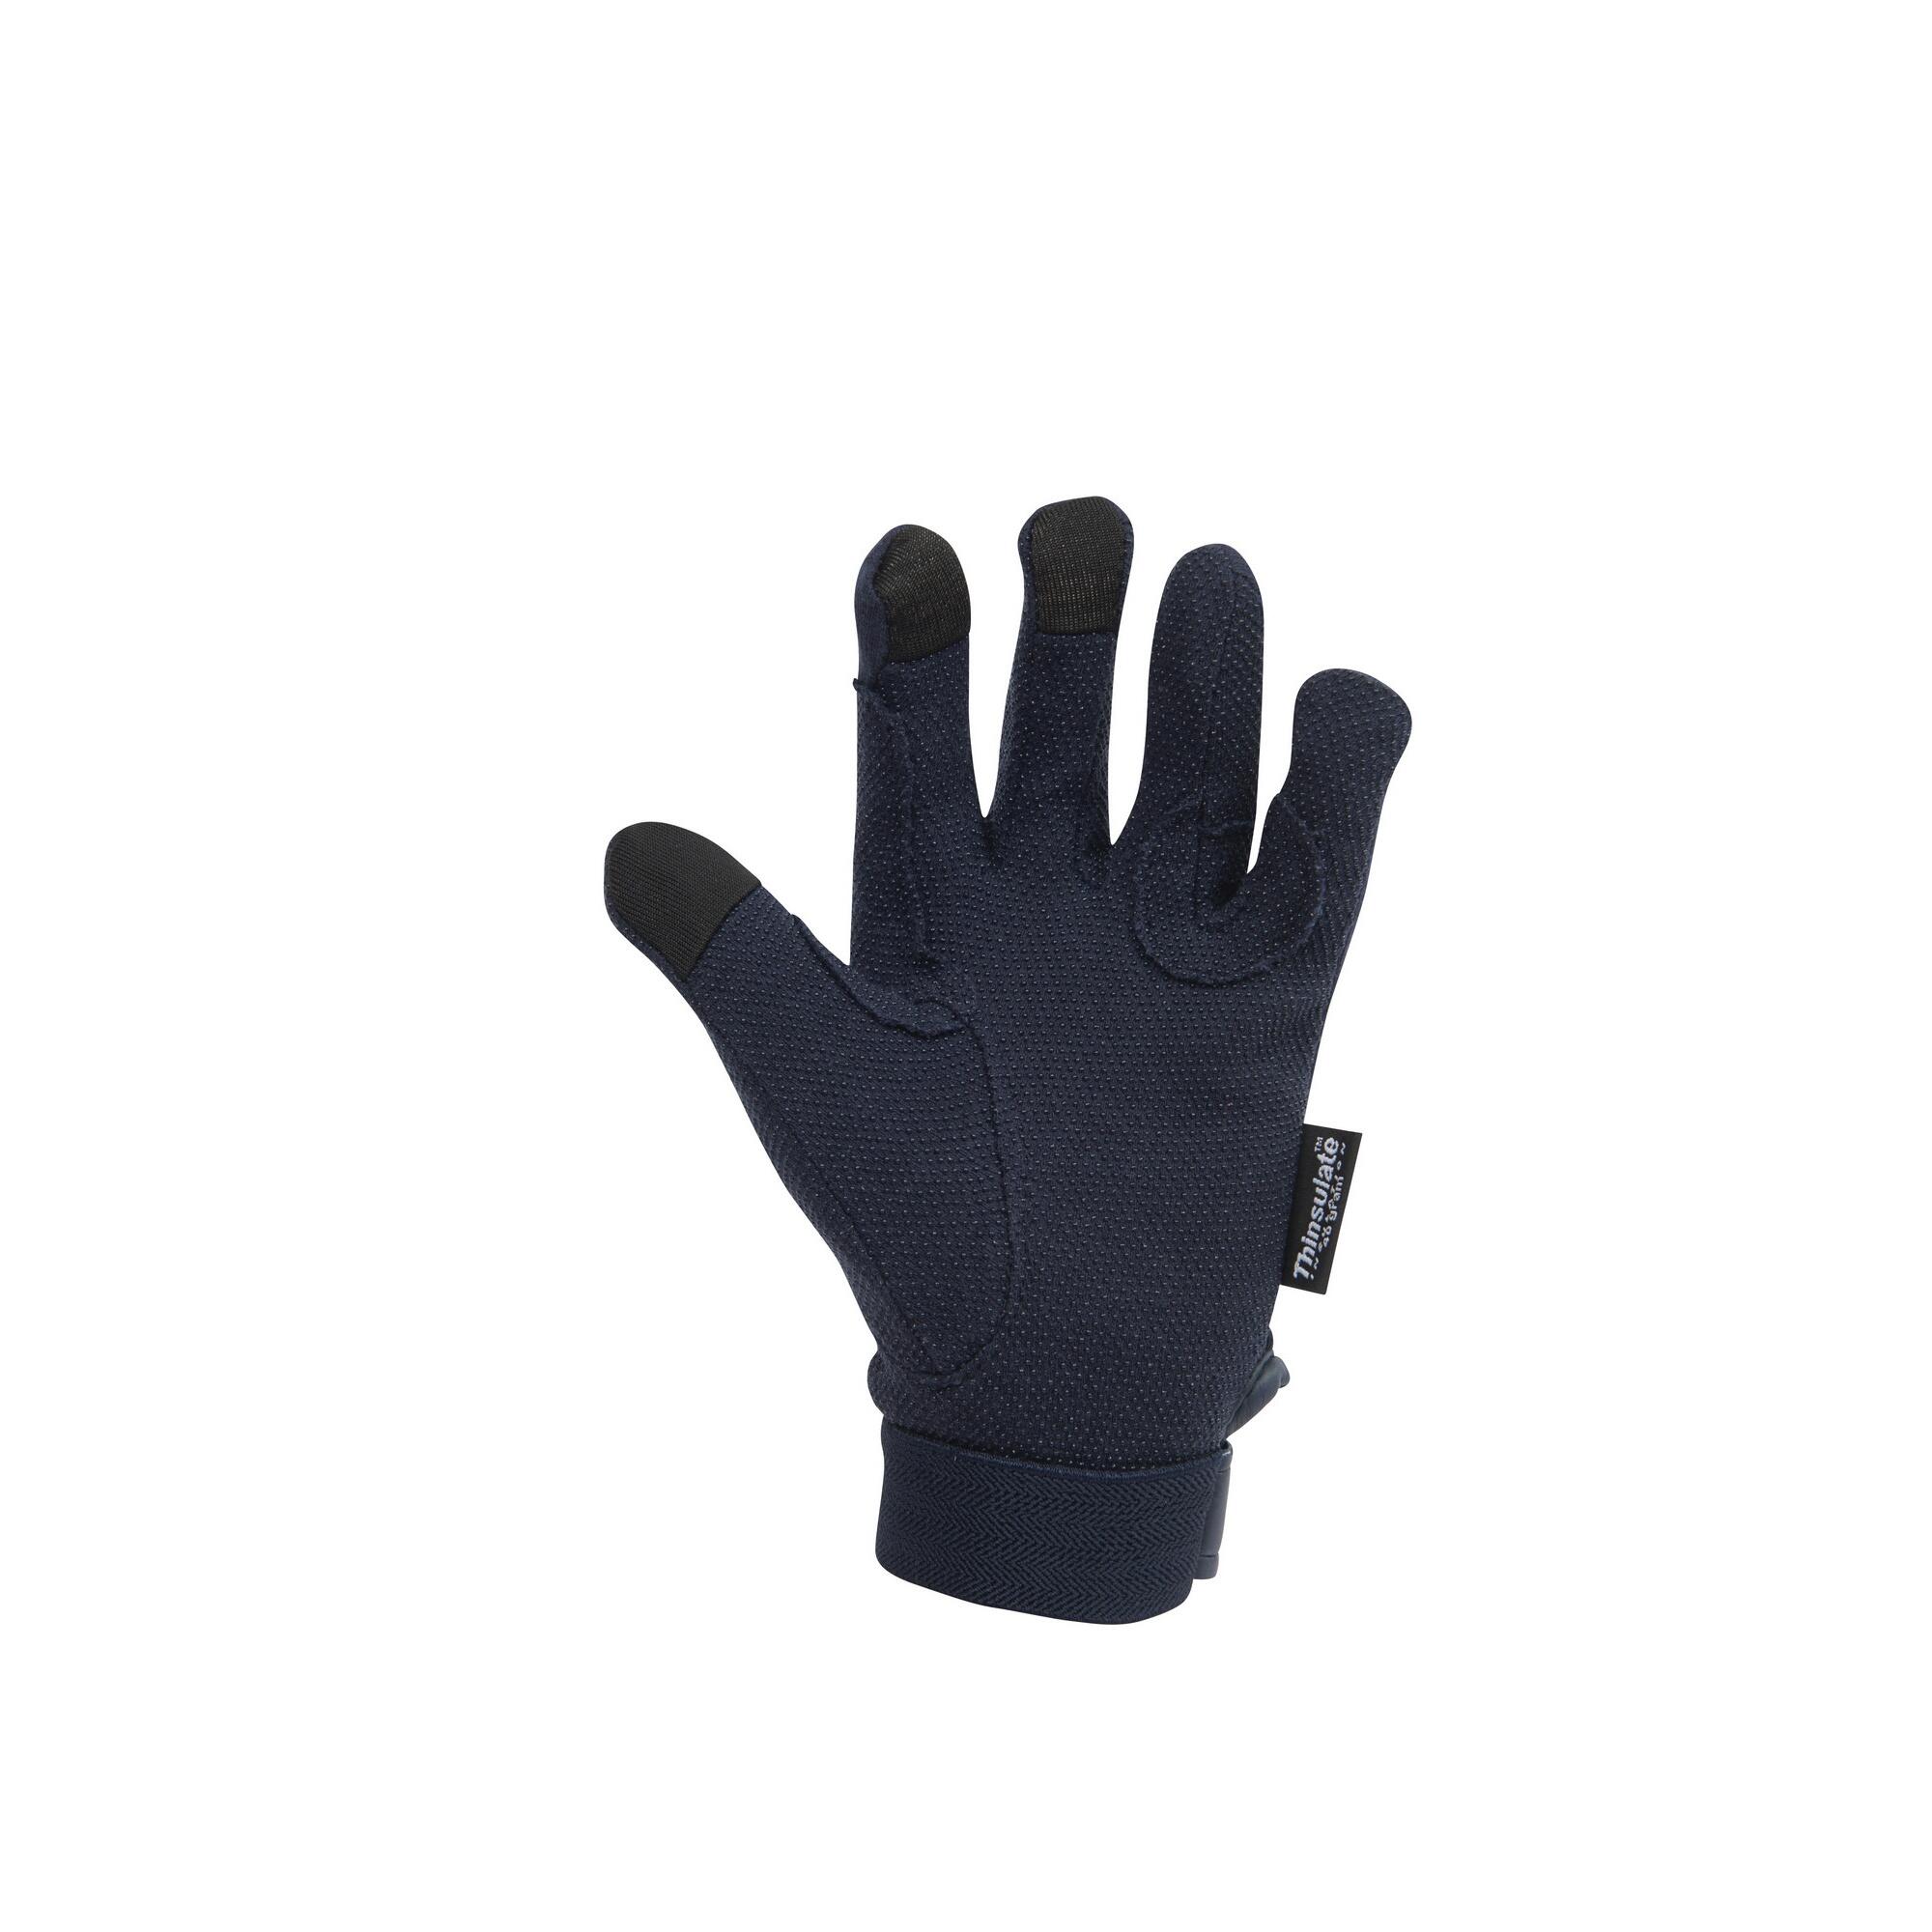 Unisex Thinsulate Winter Track Riding Gloves (Navy) 2/4